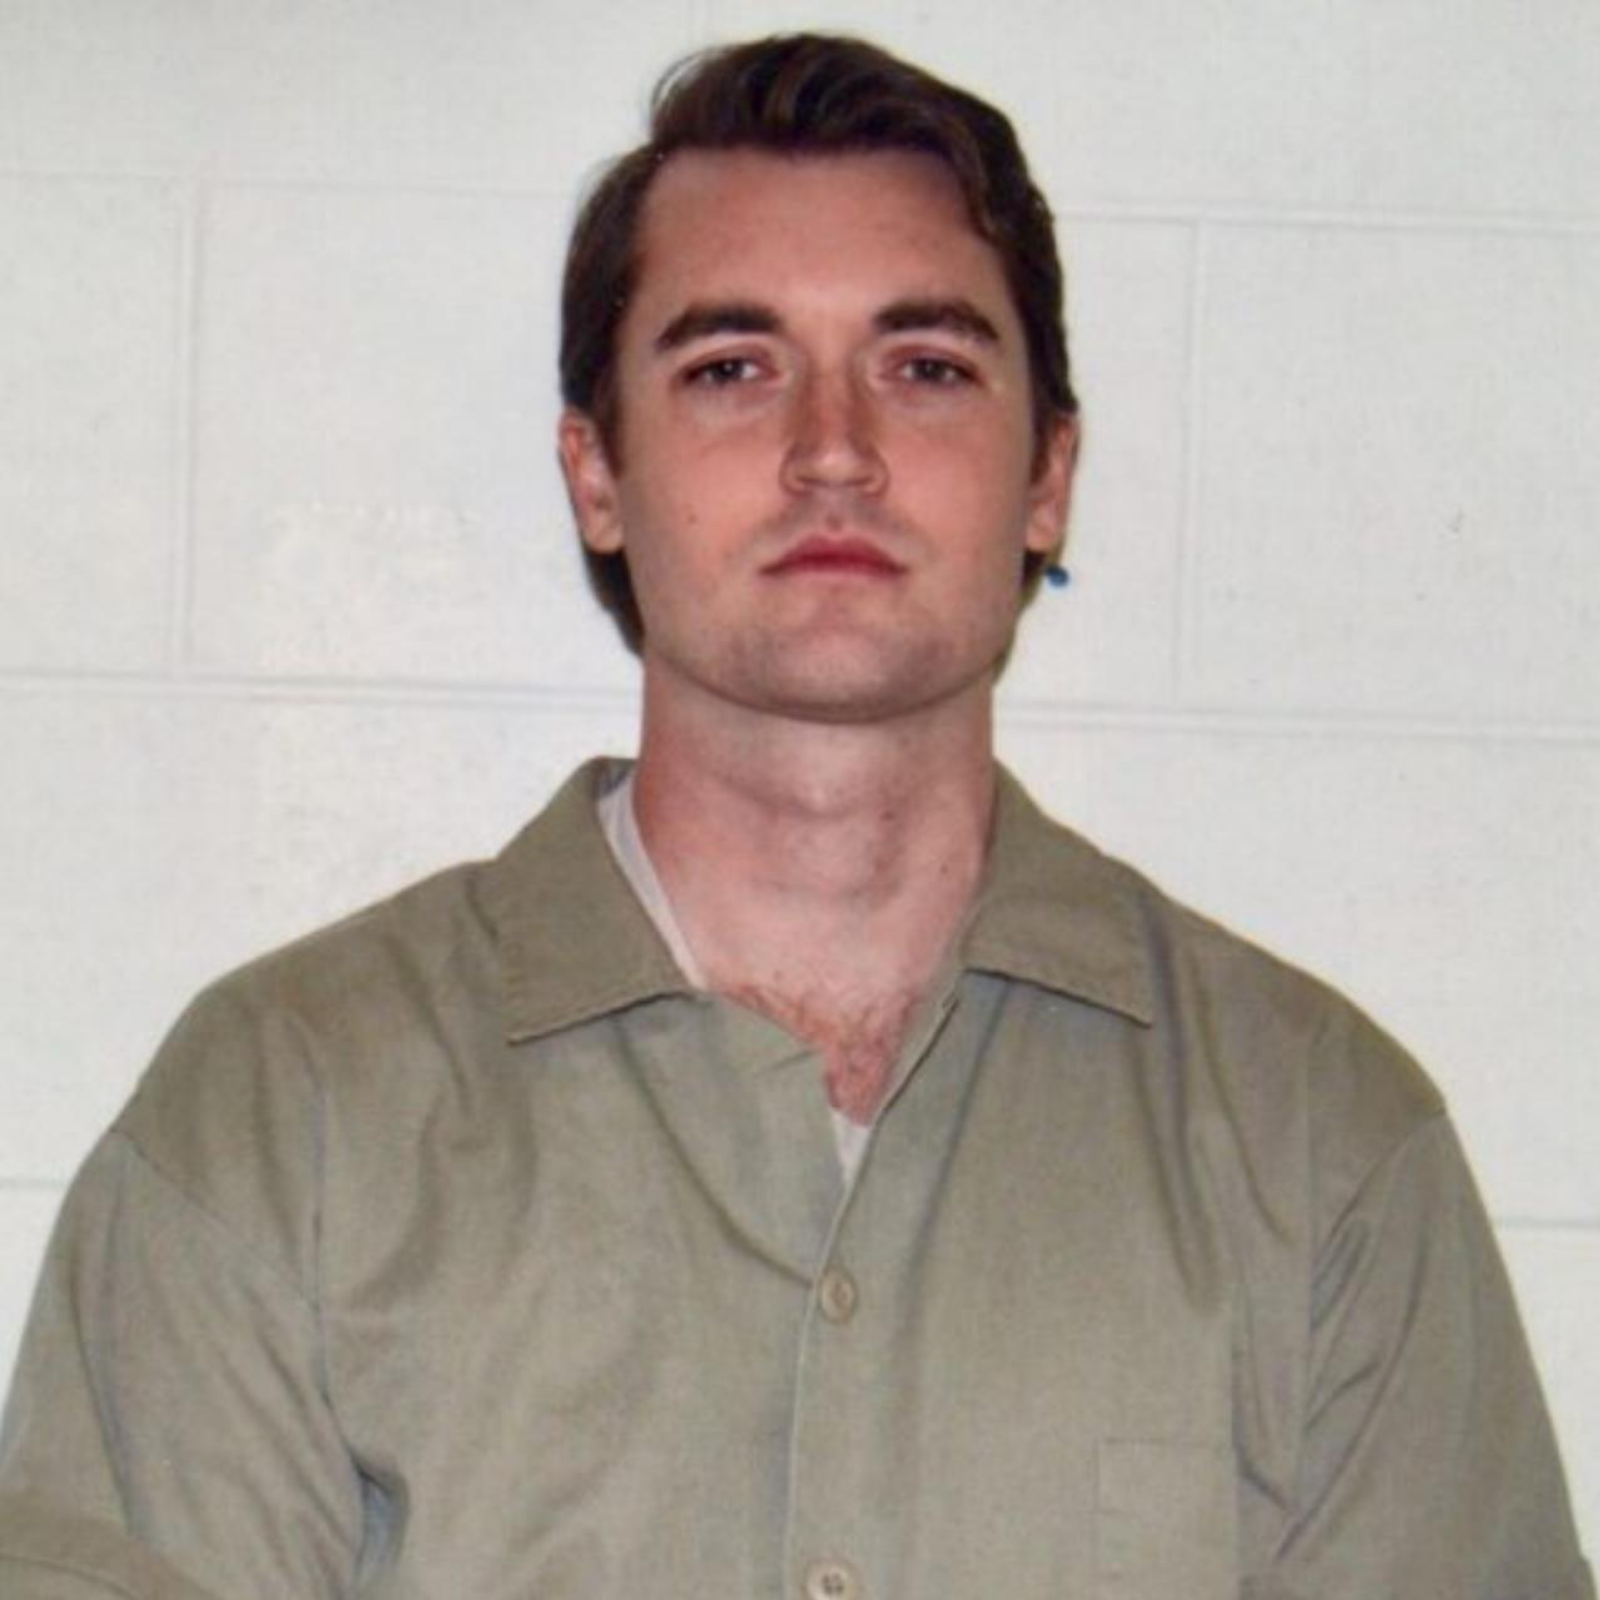 Change.org Petition Attempts to Fight for Ross Ulbricht's Freedom